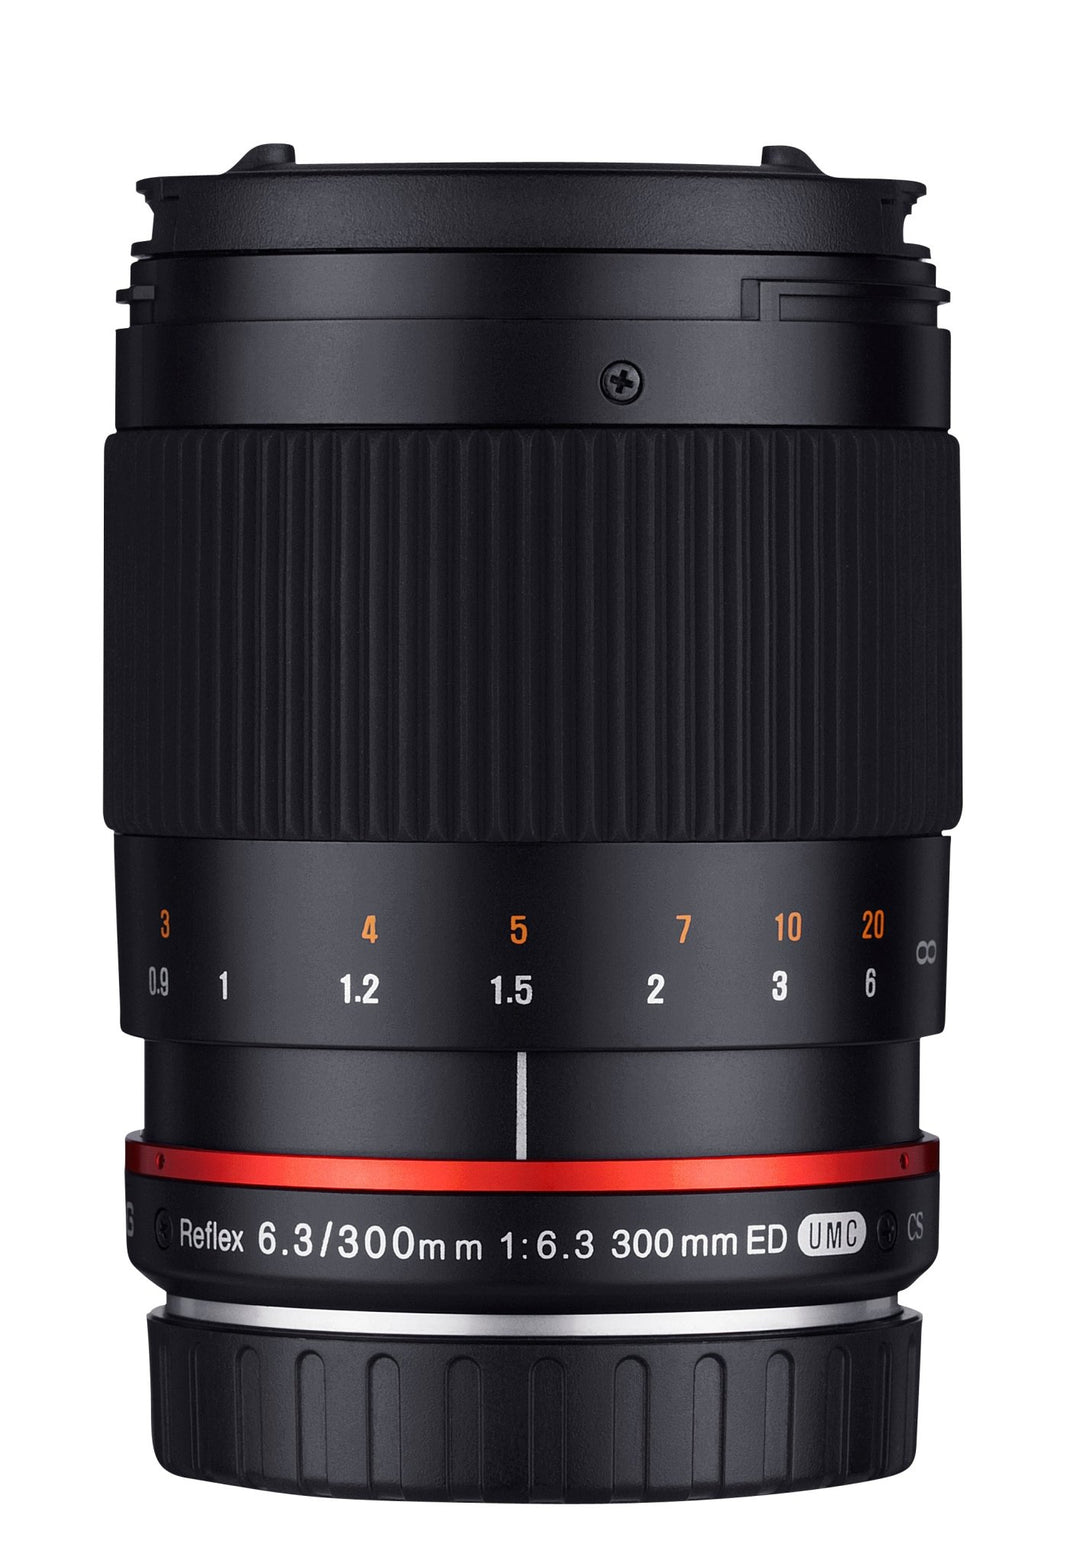 300mm F6.3 Catadioptric Compact Telephoto for Mirrorless Cameras - Rokinon